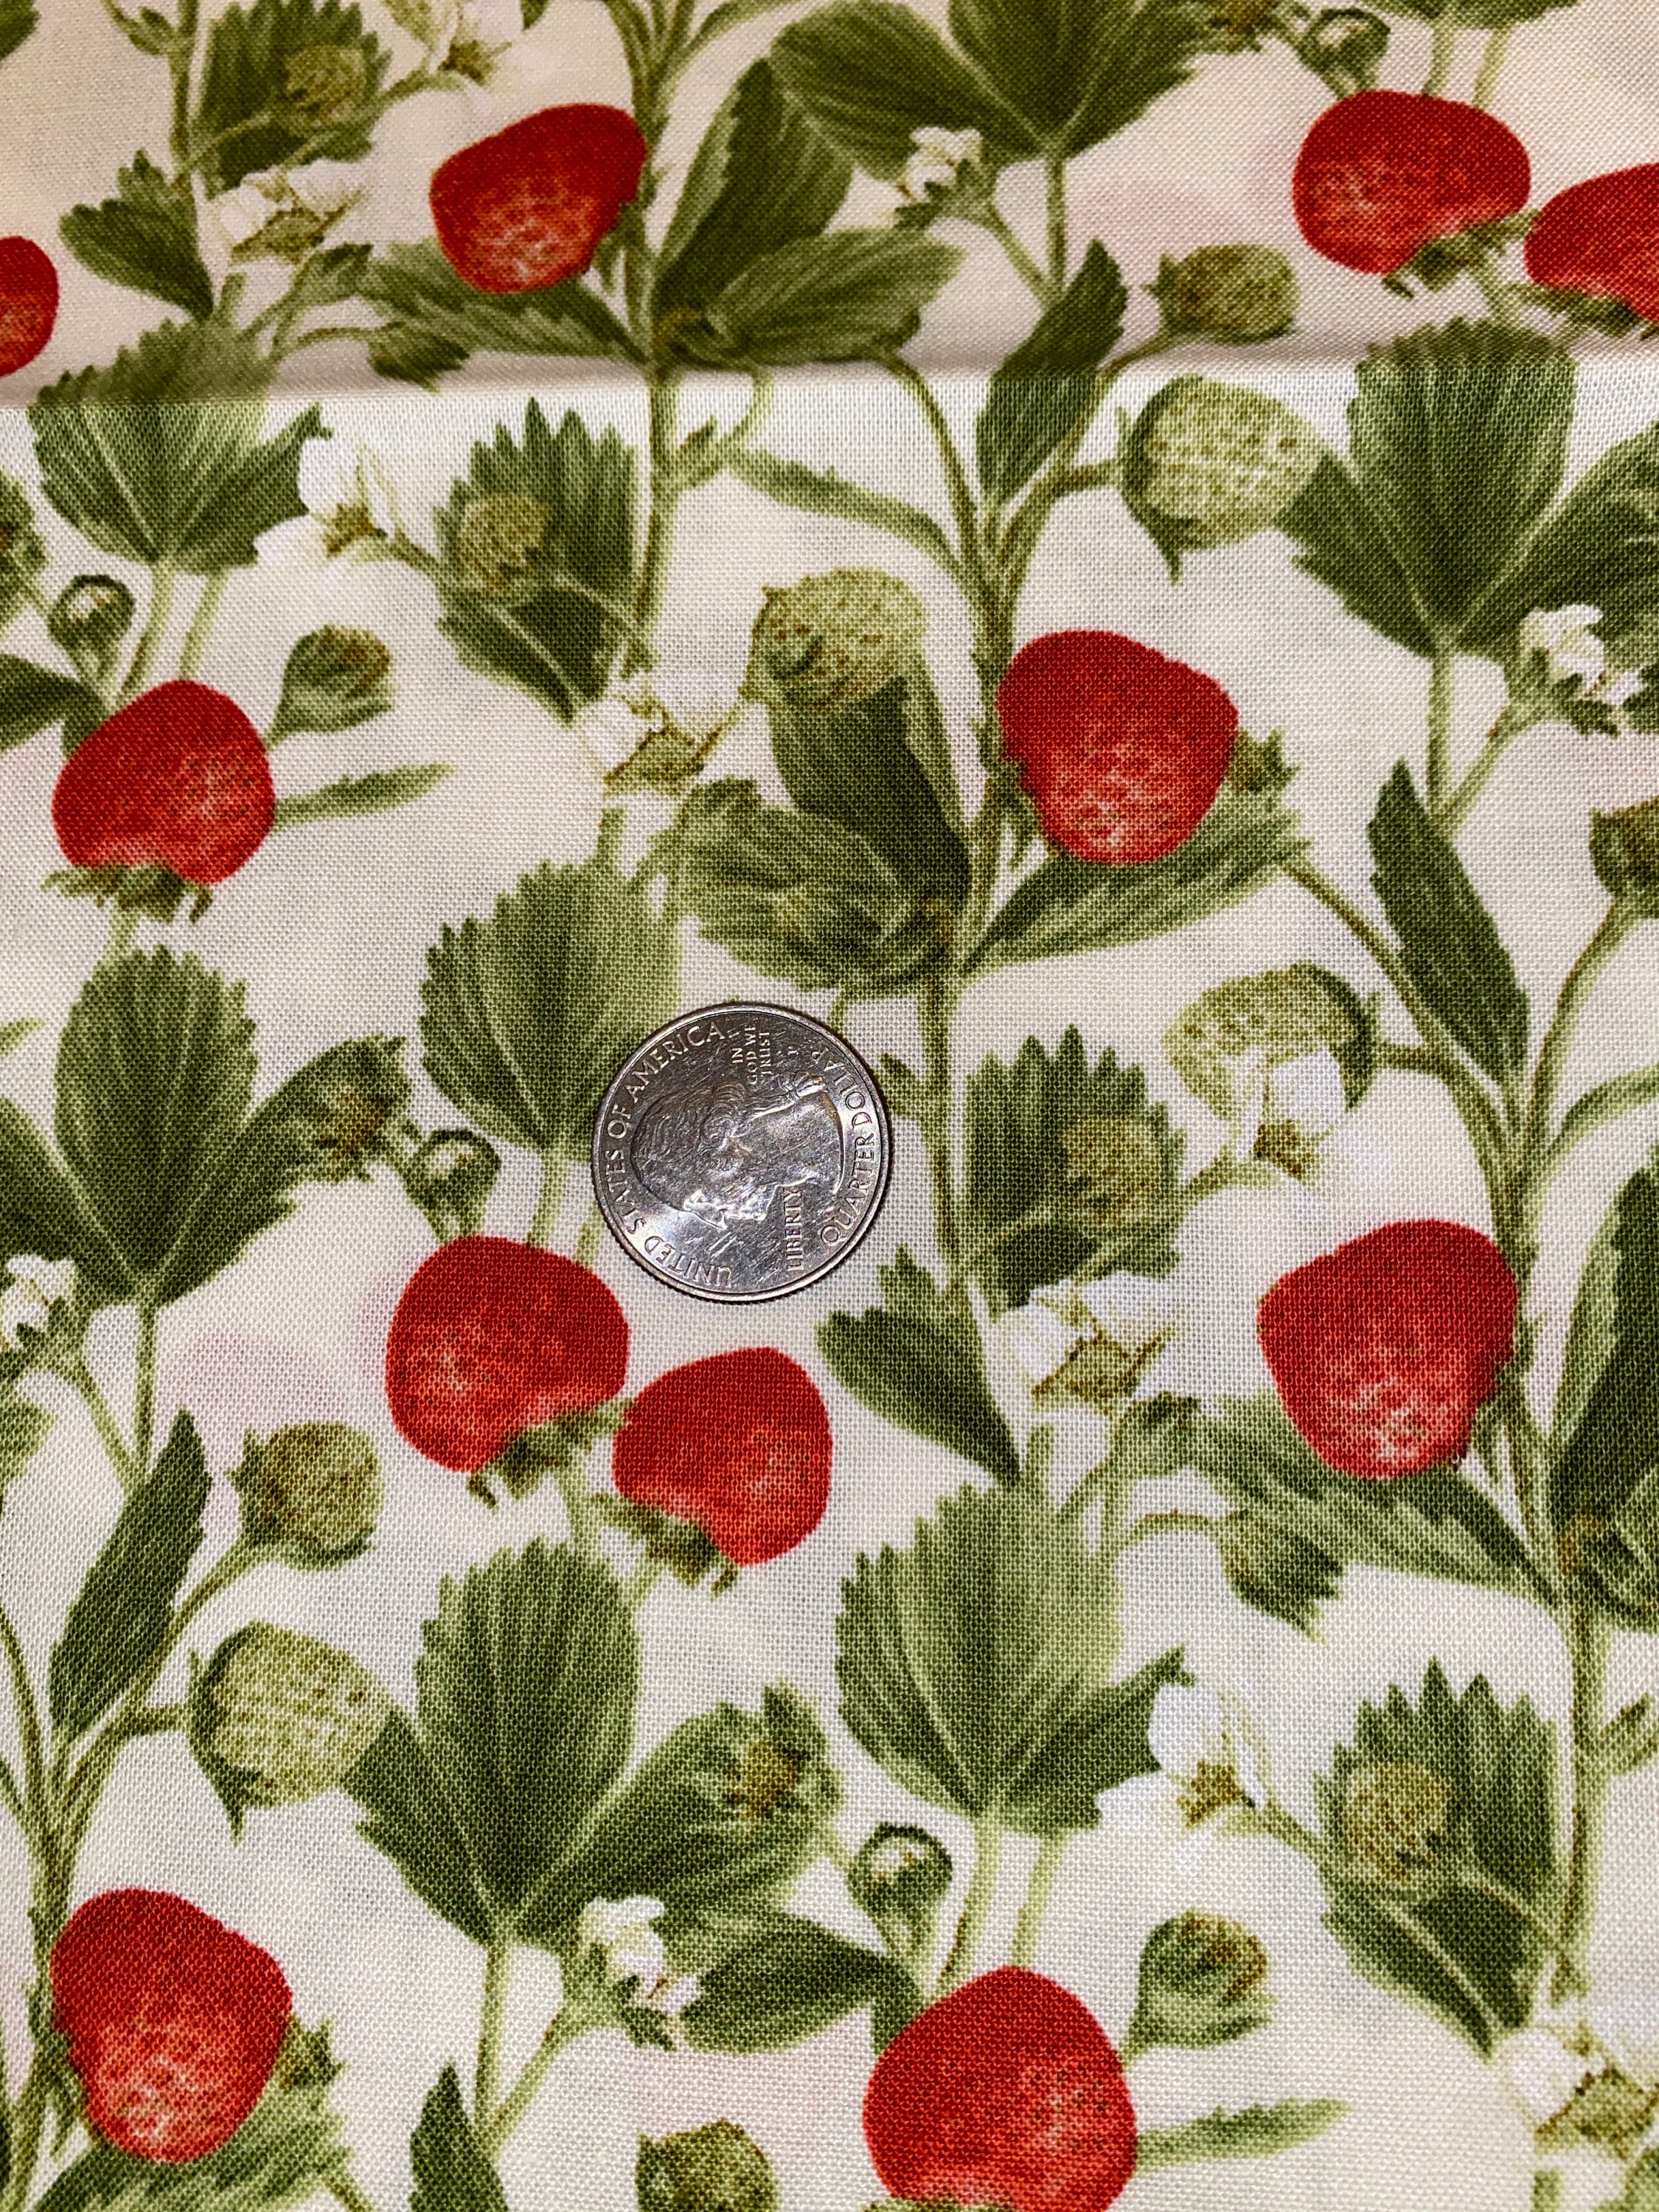 Strawberry Fabric Watercolor Wild Strawberries, Fruit, Berry. Quilting  Cotton, Sateen, Organic Knit, Jersey or Minky Fabric by the Yard 